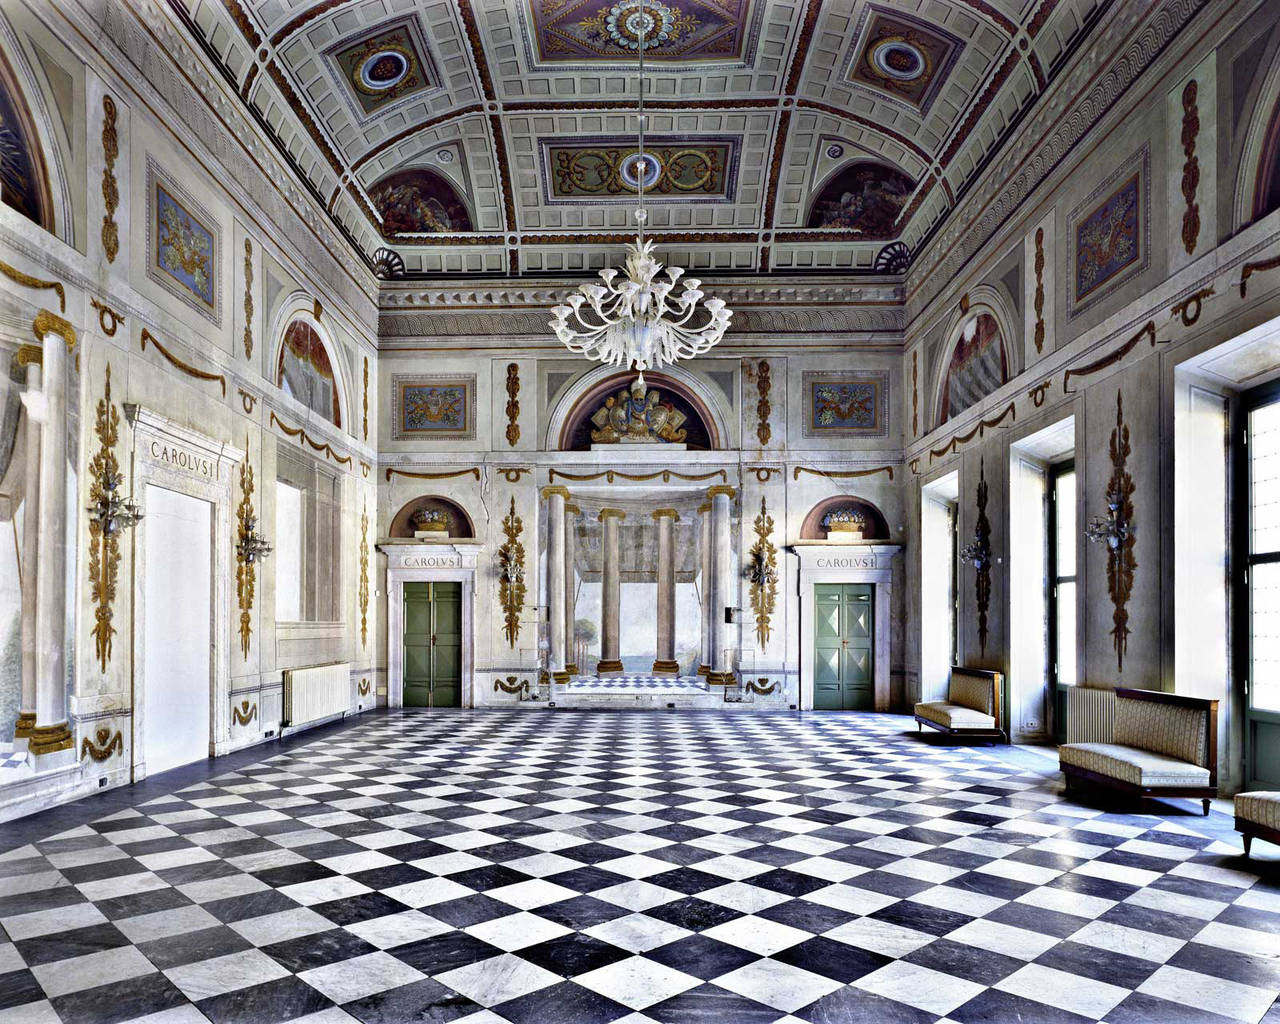 Palazzo Ducale di Massa
2016
C-print
120 x 150 cm unframed
Edition of 5
Signed and numbered on verso label. 

The photographer is based in Florence, and is fascinated how his architectural subject matter allows him to control the composition of his